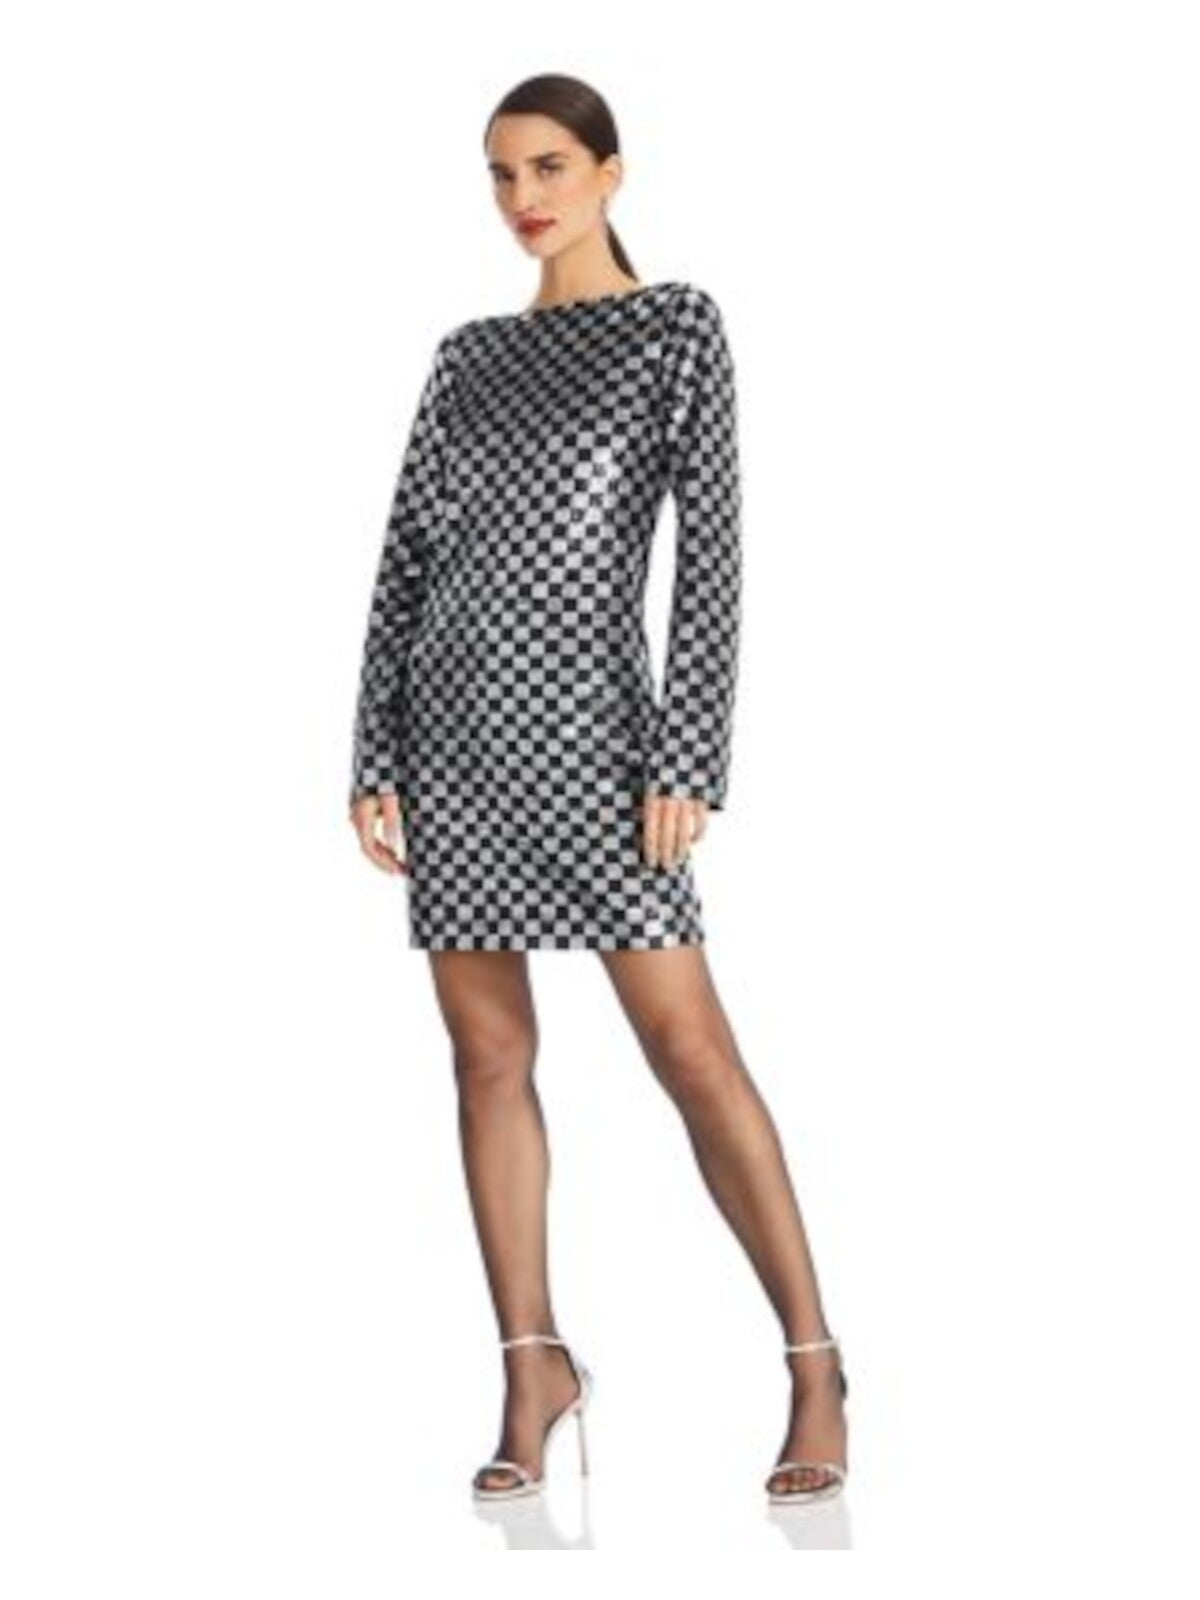 MICHAEL KORS Womens Black Sequined Zippered Lined Check Long Sleeve Boat Neck Above The Knee Cocktail Sheath Dress 4